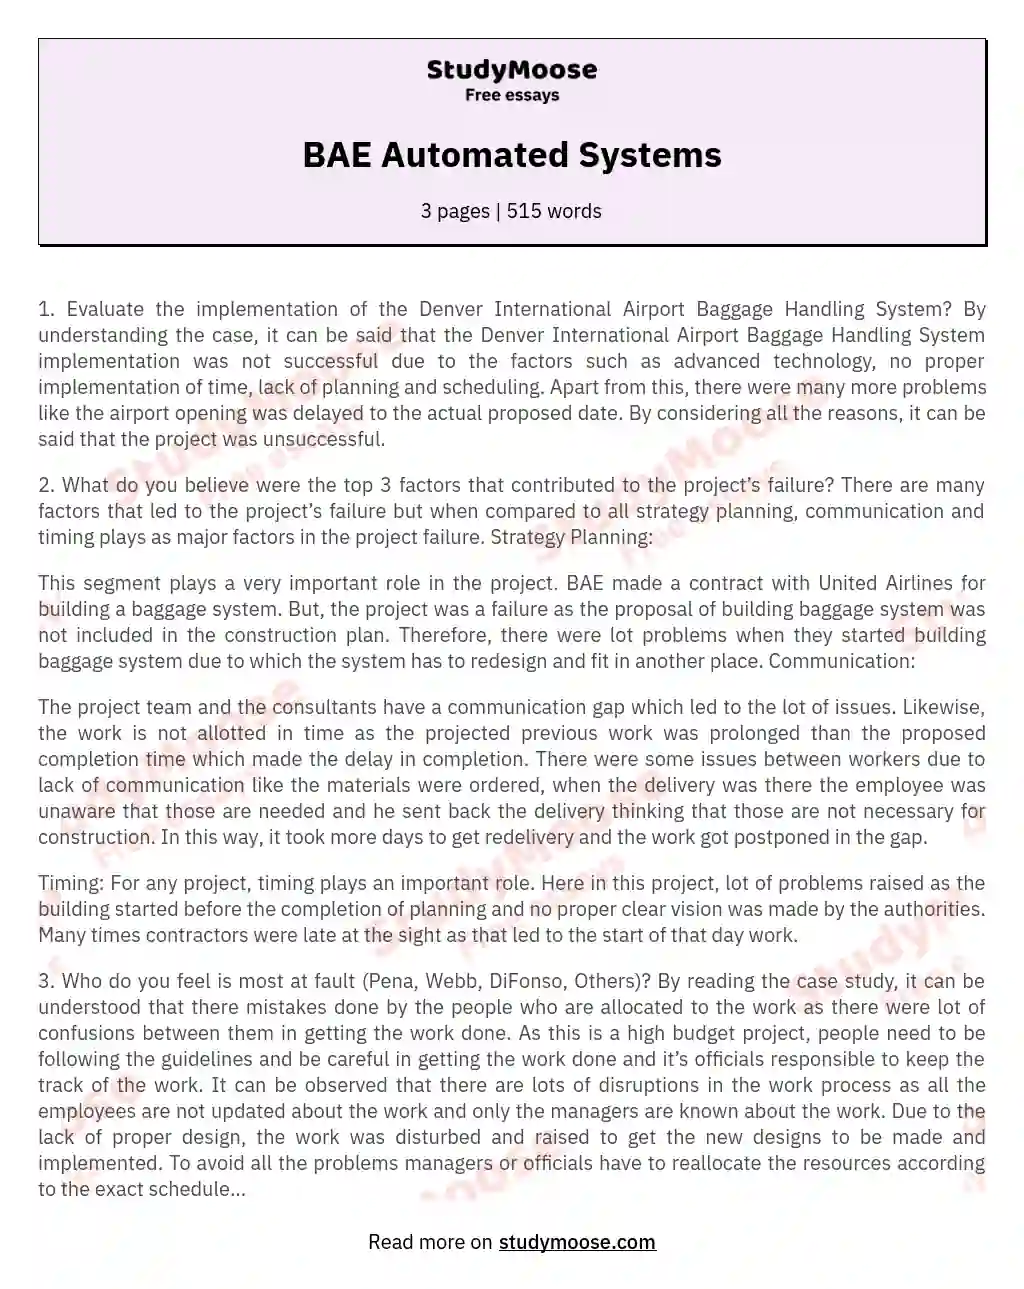 BAE Automated Systems essay